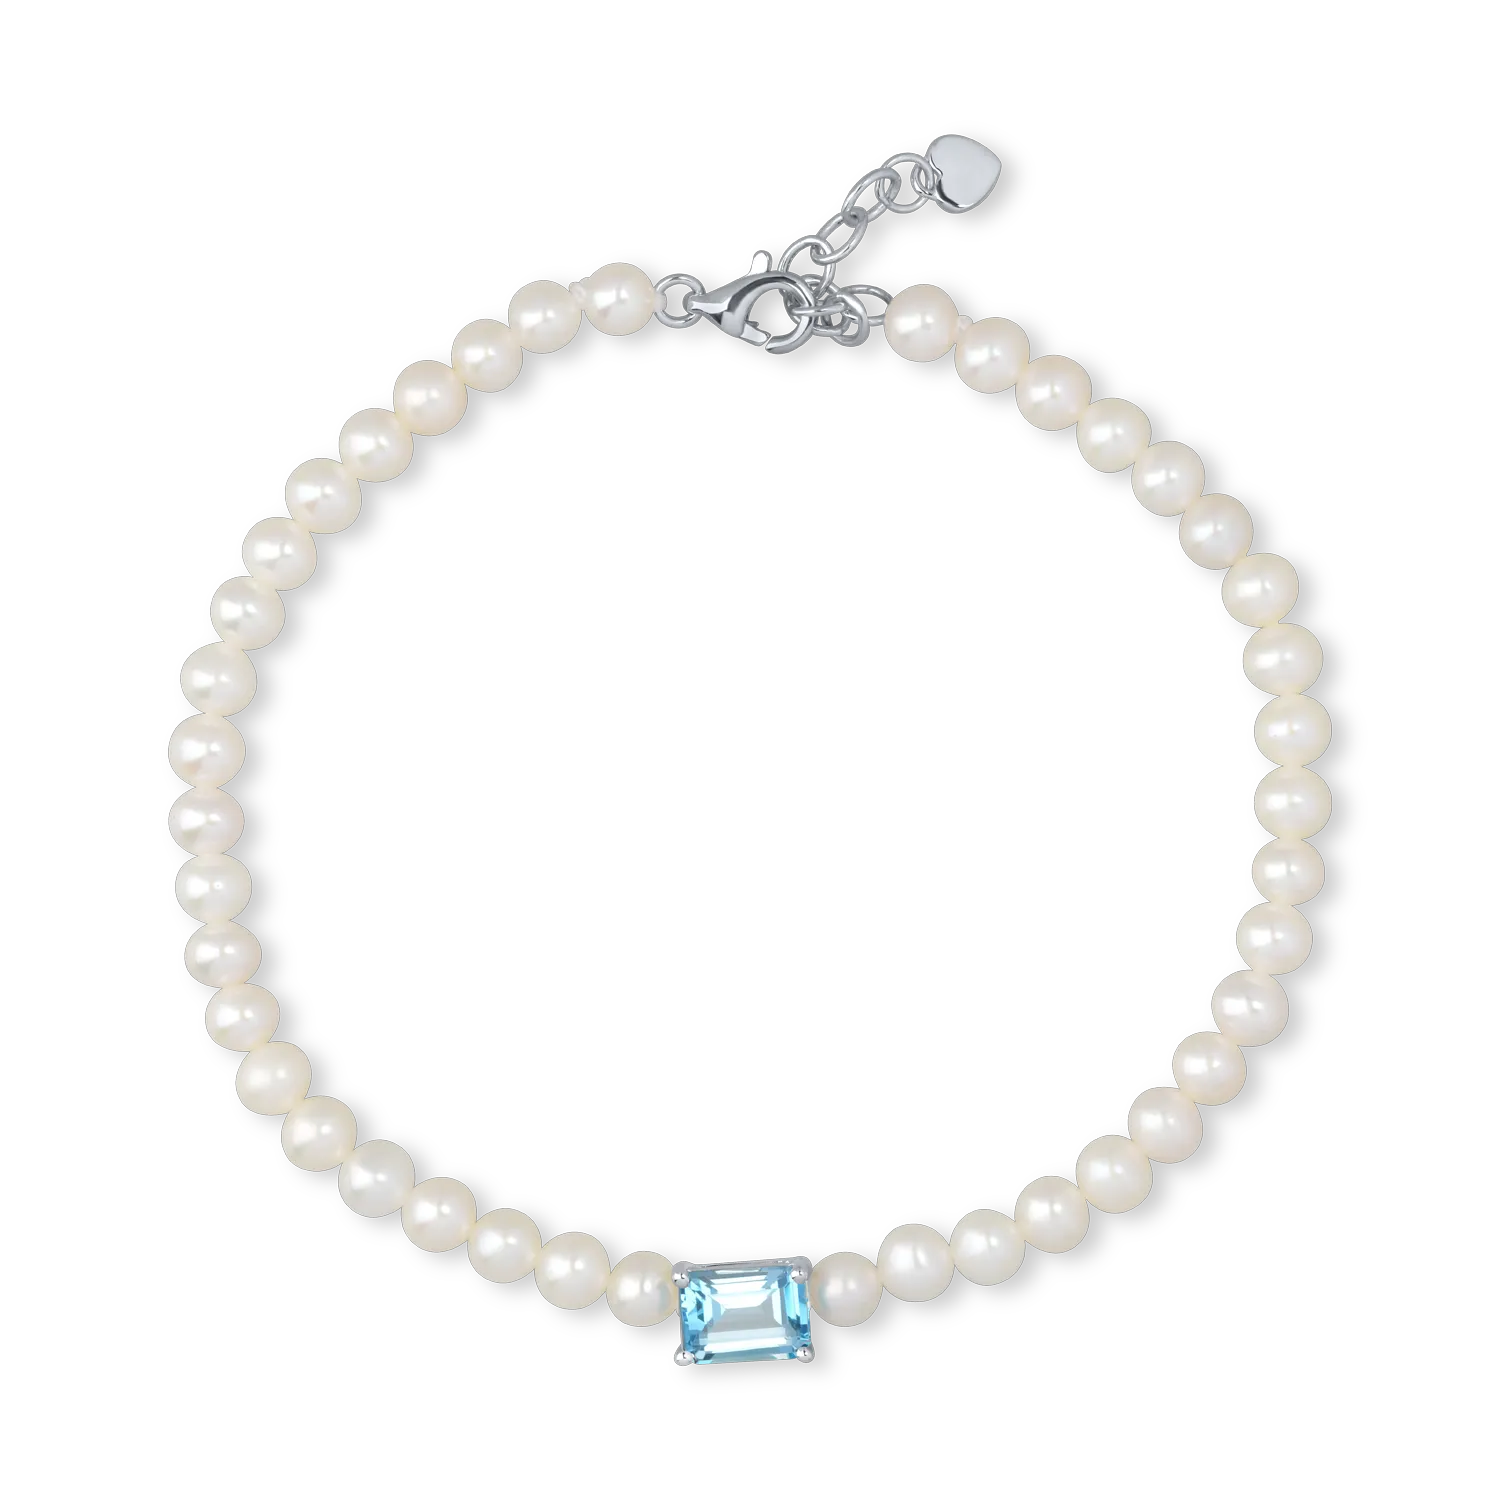 White gold bracelet with 22.8ct fresh water pearls and 1.2ct blue topaz